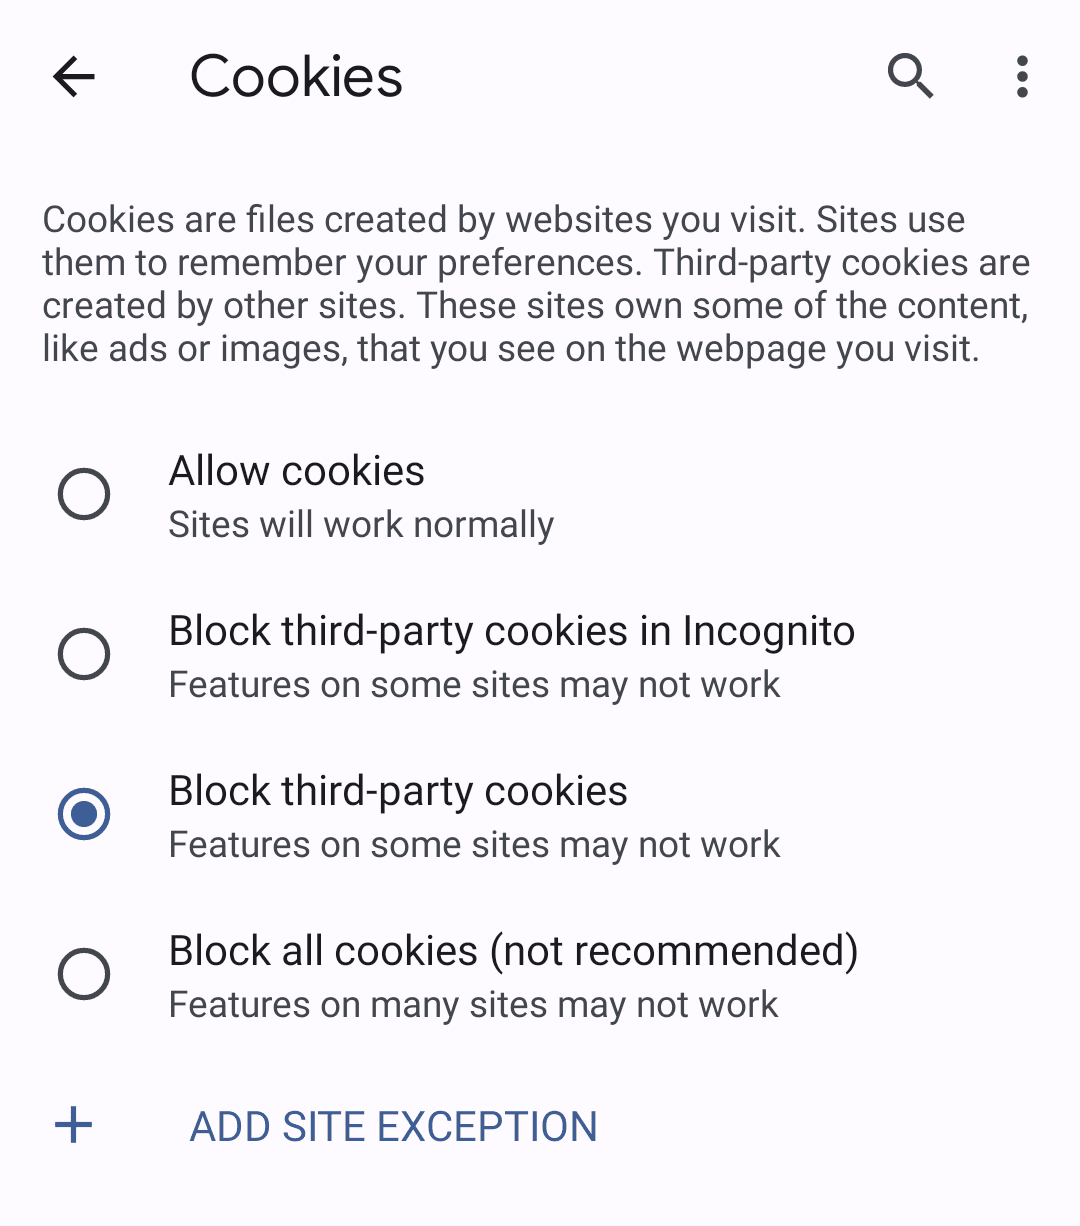 Simulate third-party cookie phase-out by configuring Chrome to block them